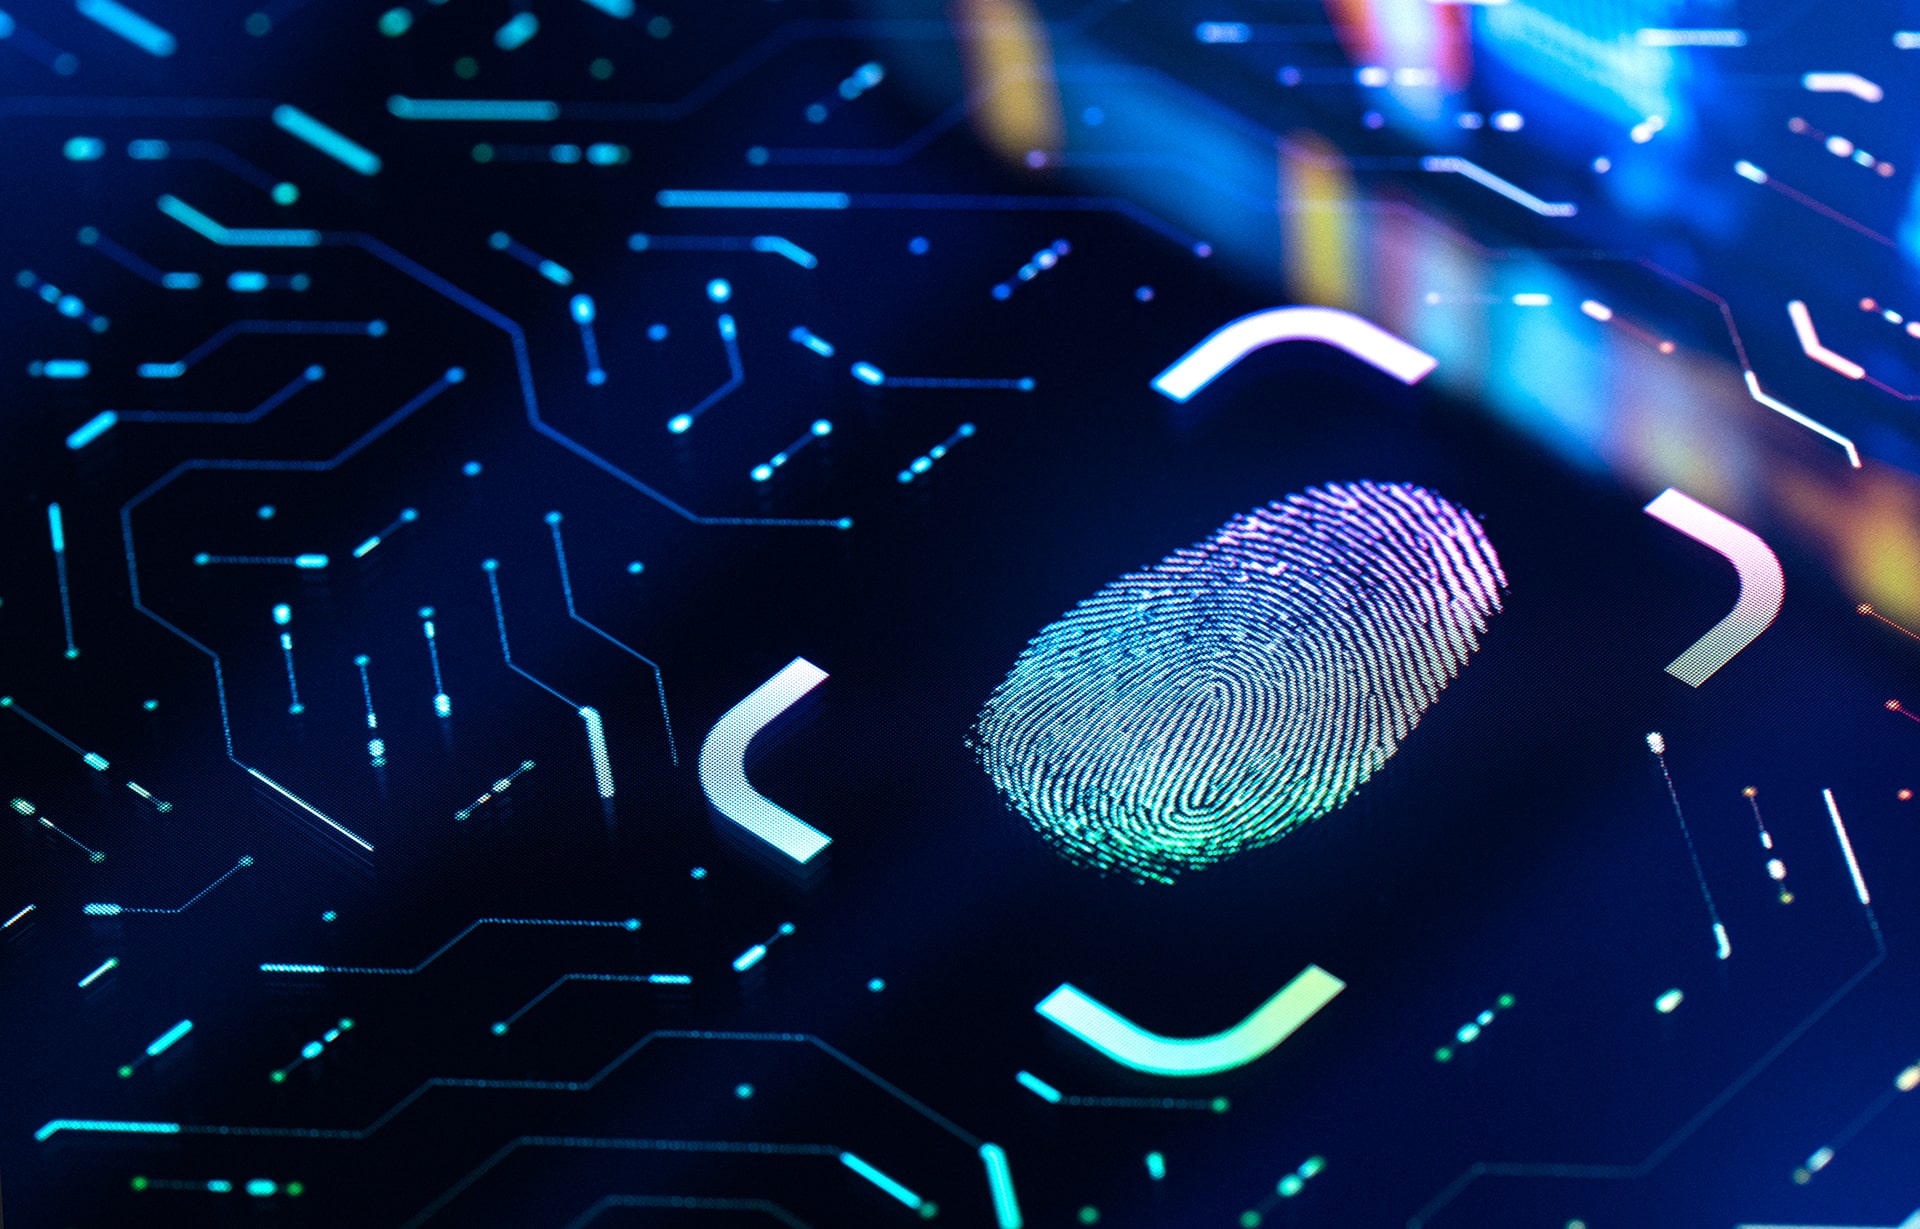 abstract image representing the Fingerprint Biometric Authentication Button. Digital Security Concept